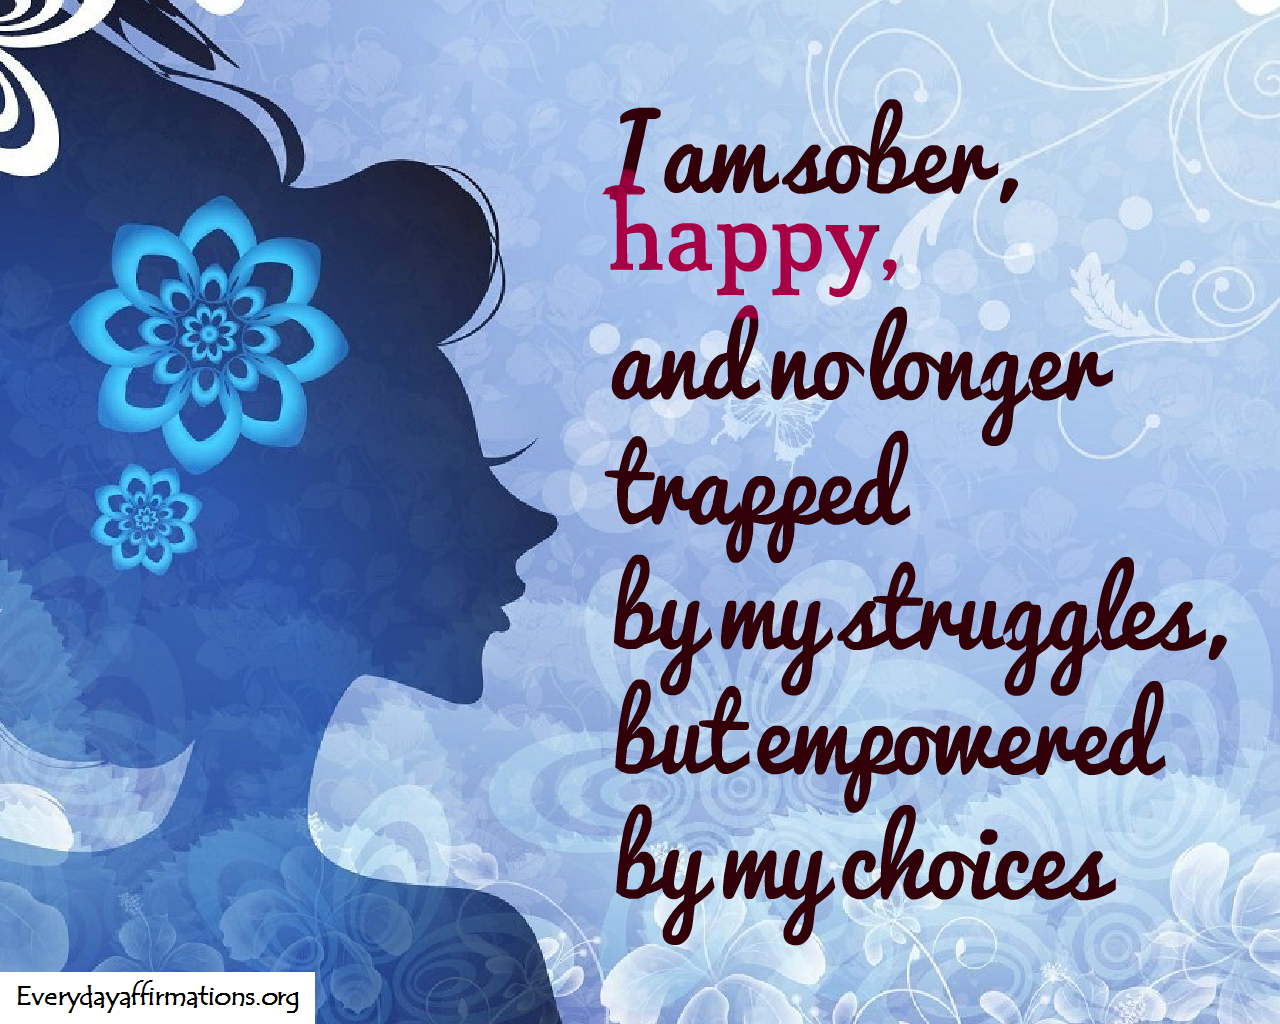 46 Affirmations for Women to assist through Meaningful 